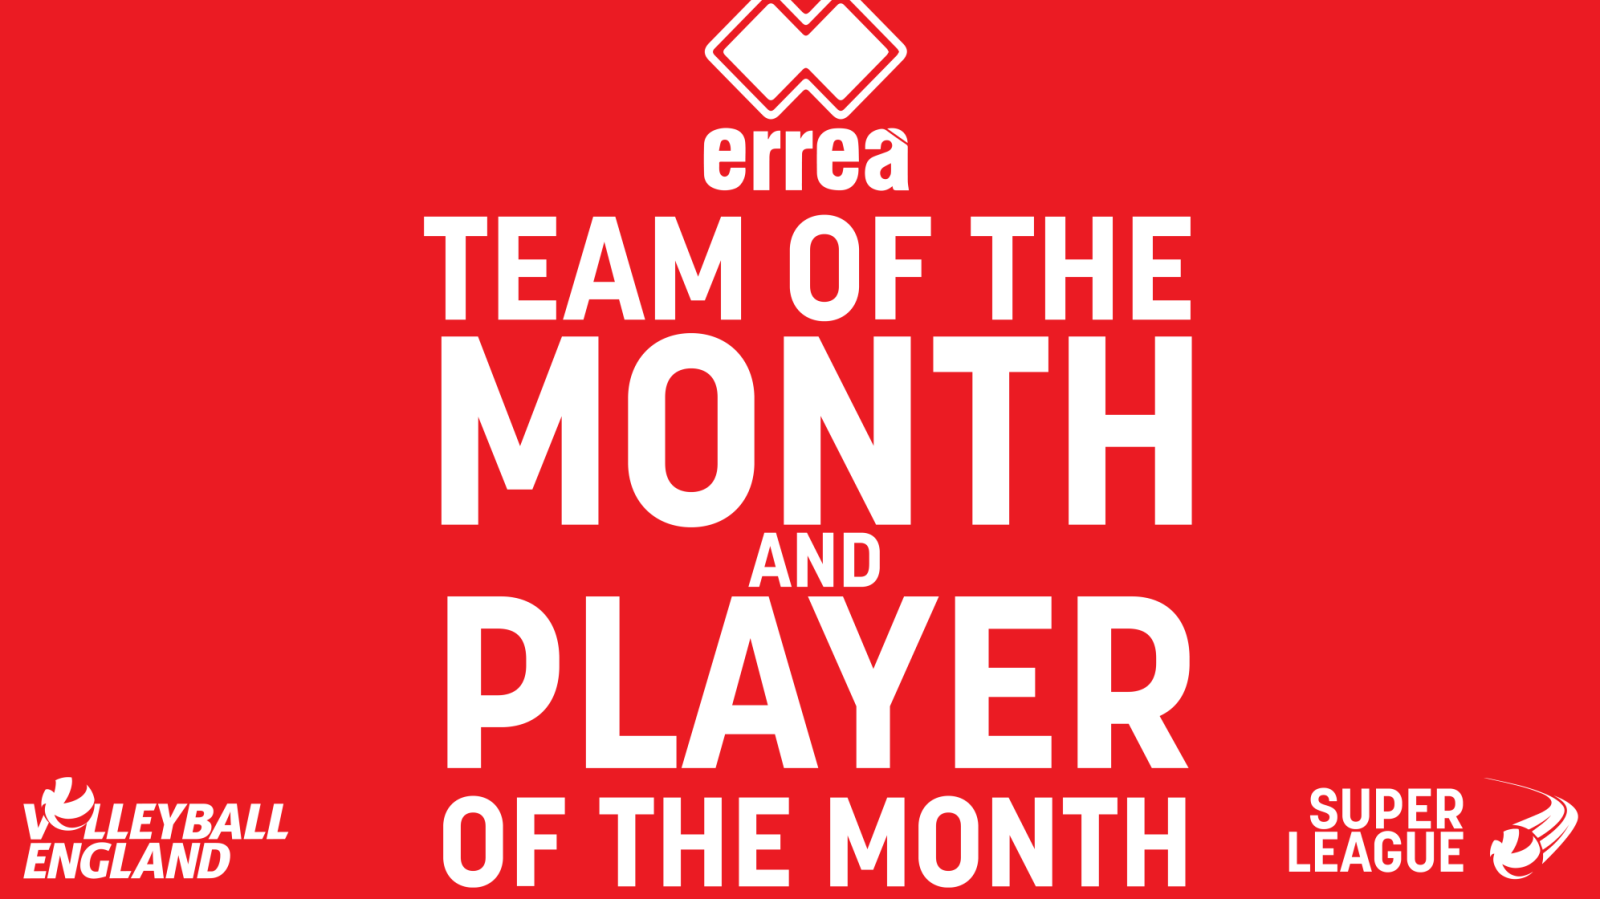 Super League Teams of the Month and Errea Players of the Month for October 